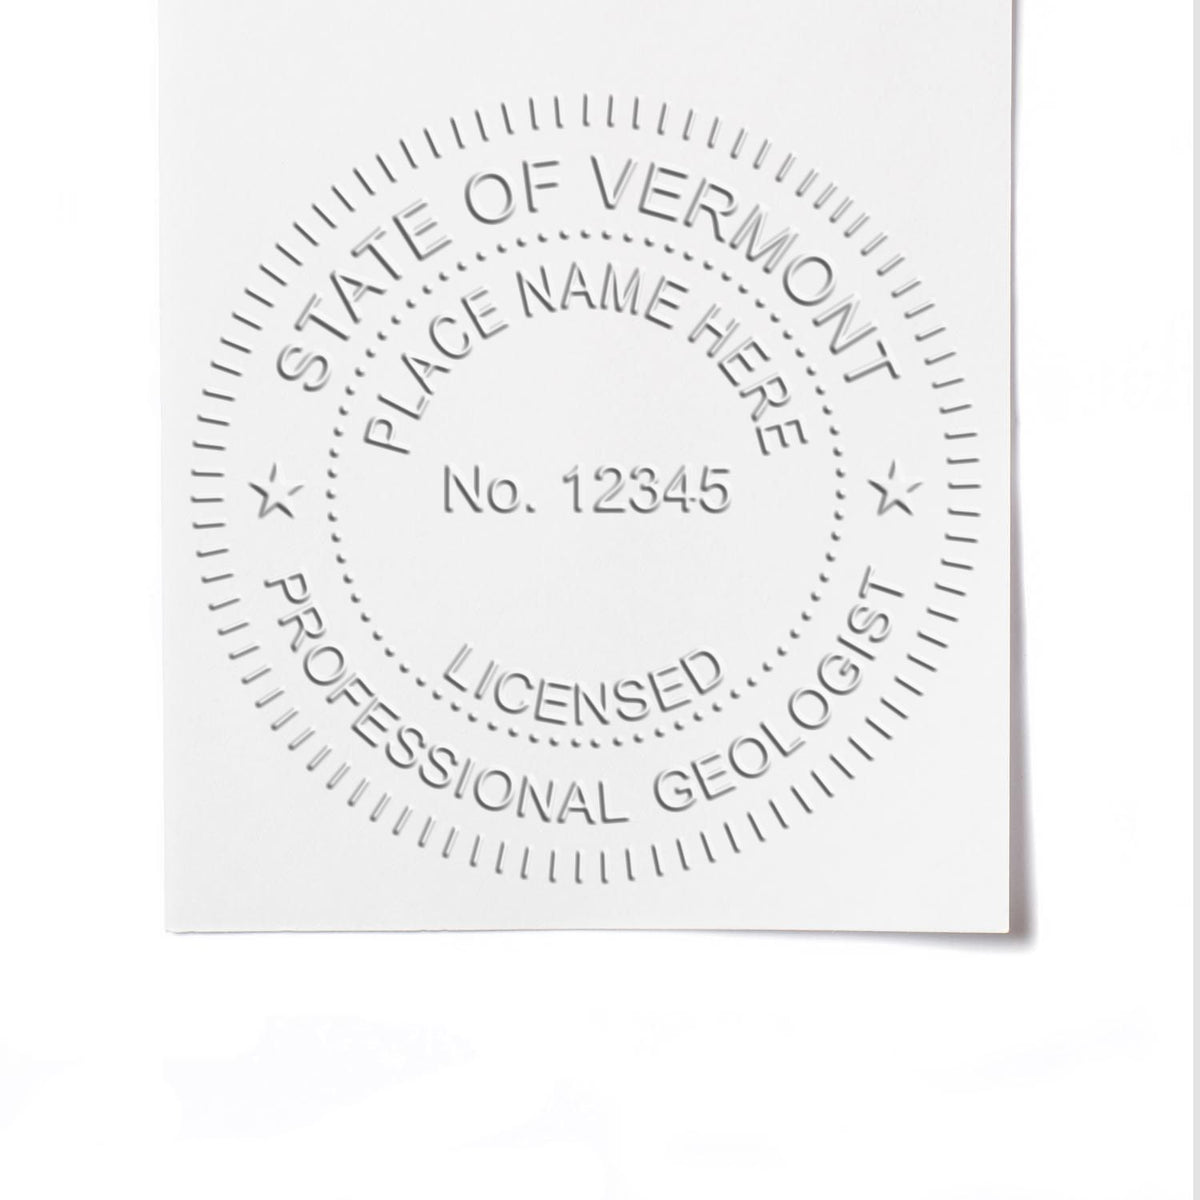 A photograph of the Soft Vermont Professional Geologist Seal stamp impression reveals a vivid, professional image of the on paper.